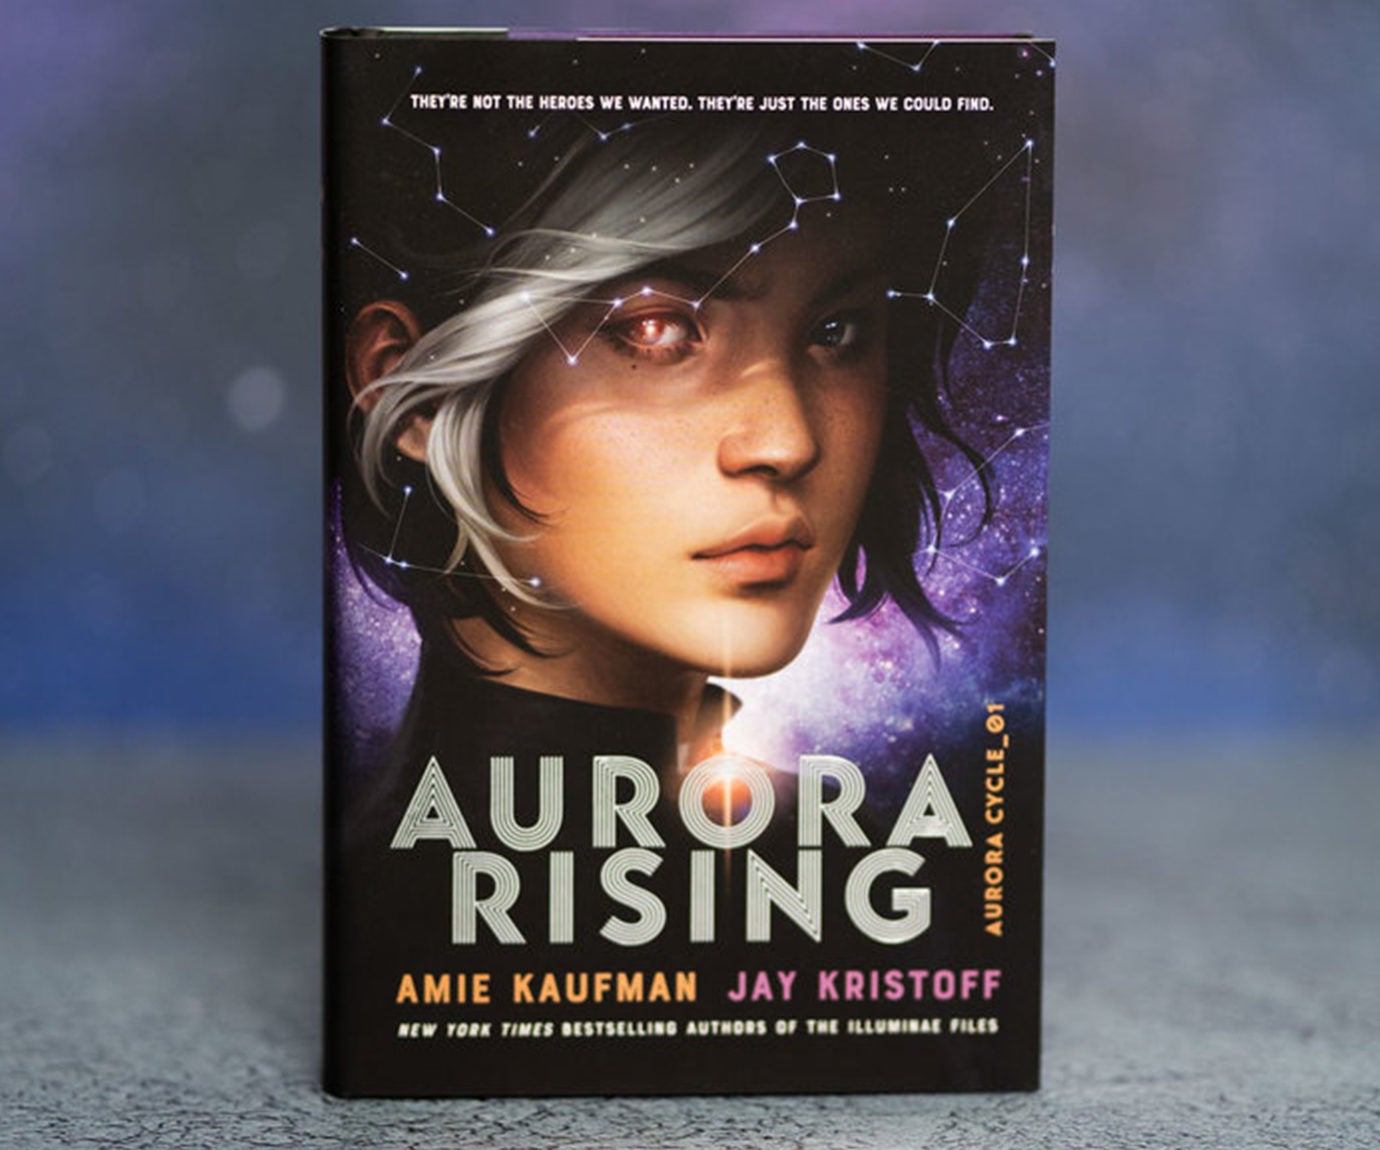 Read a Free Excerpt from Aurora Rising by Amie Kaufman and Jay Kristoff -  Underlined